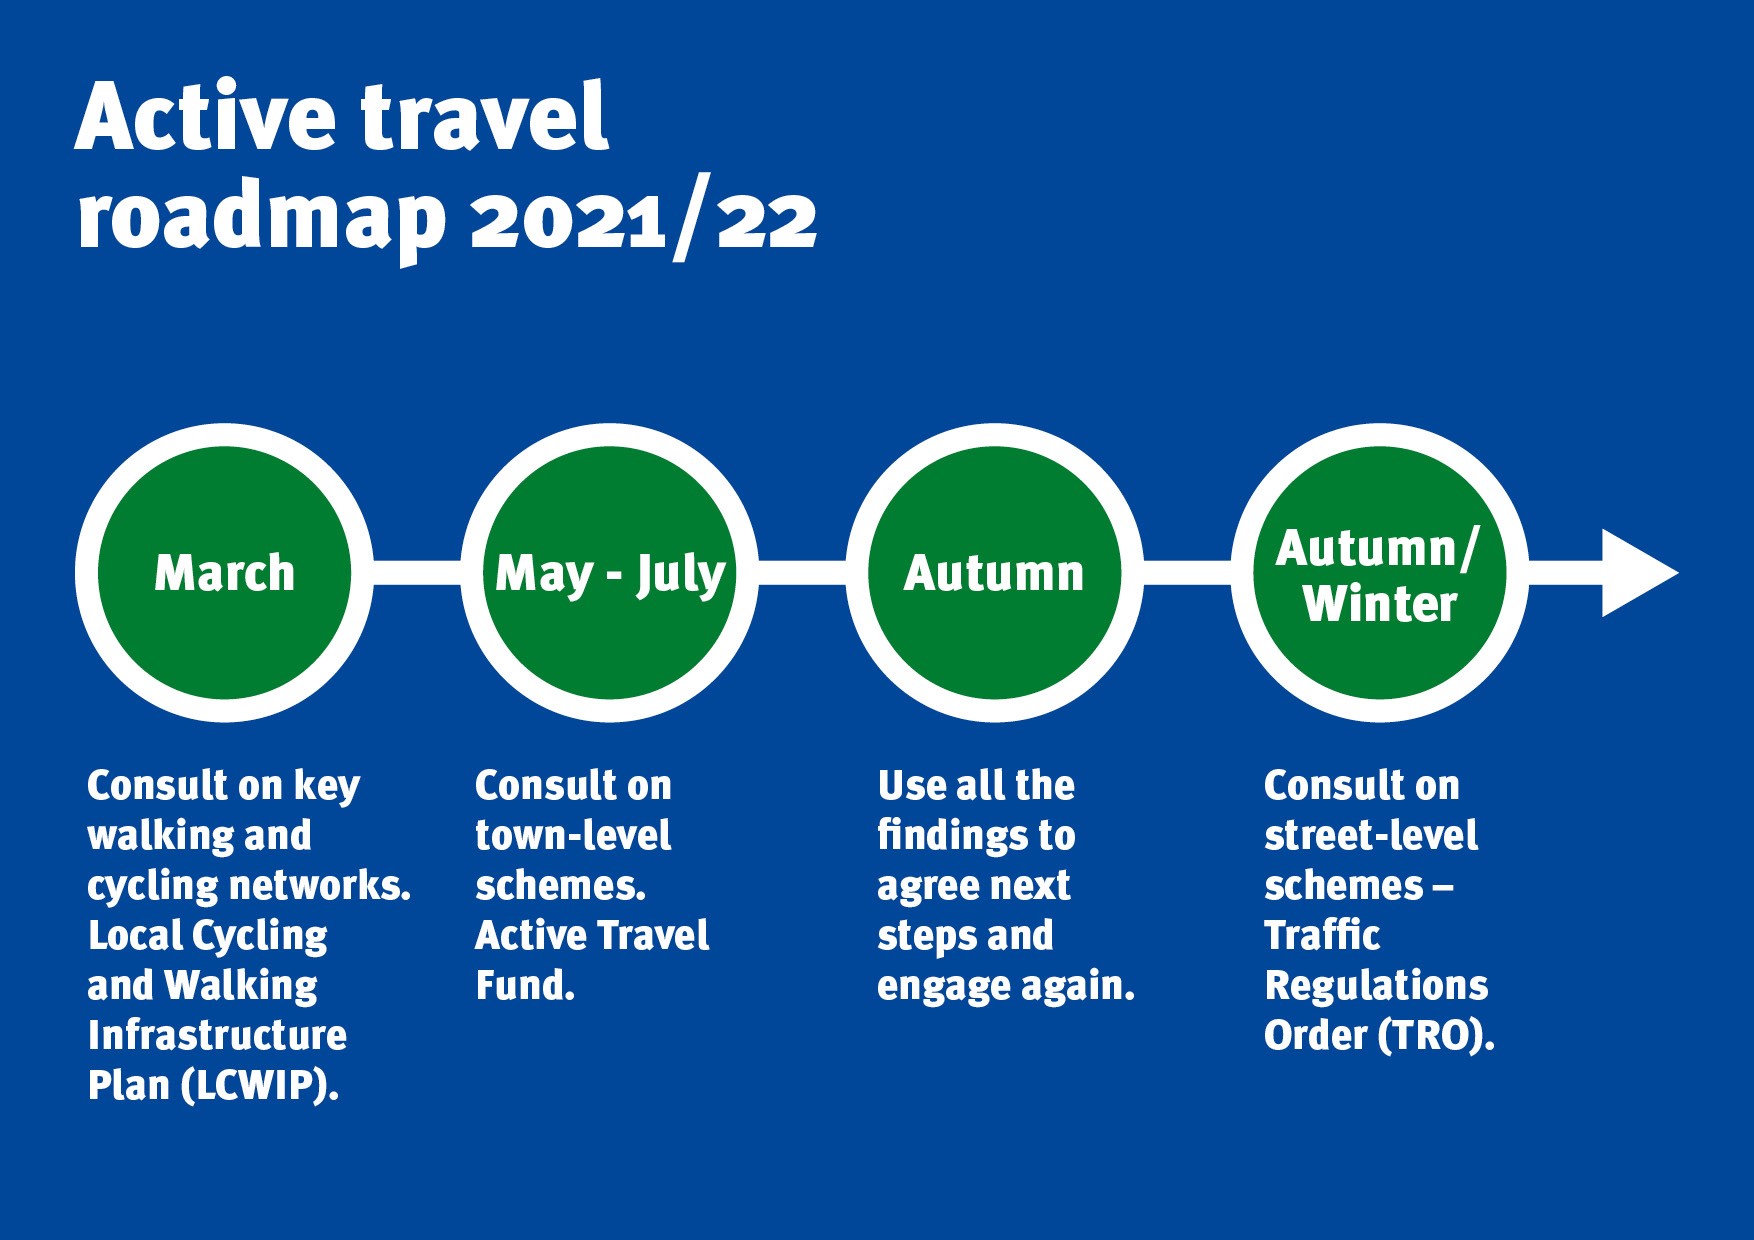 Active travel roadmap 2021 March - Consult on key walking and cycling networks. Local Cycling and Walking Infrastructure Plan (LCWIP). May - July Consult on town-level schemes. Active Travel Fund. Autumn - Use all the findings to agree next steps and engage again. Autumn/Winter - Consult on street-level schemes – Traffic Regulations Order (TRO).